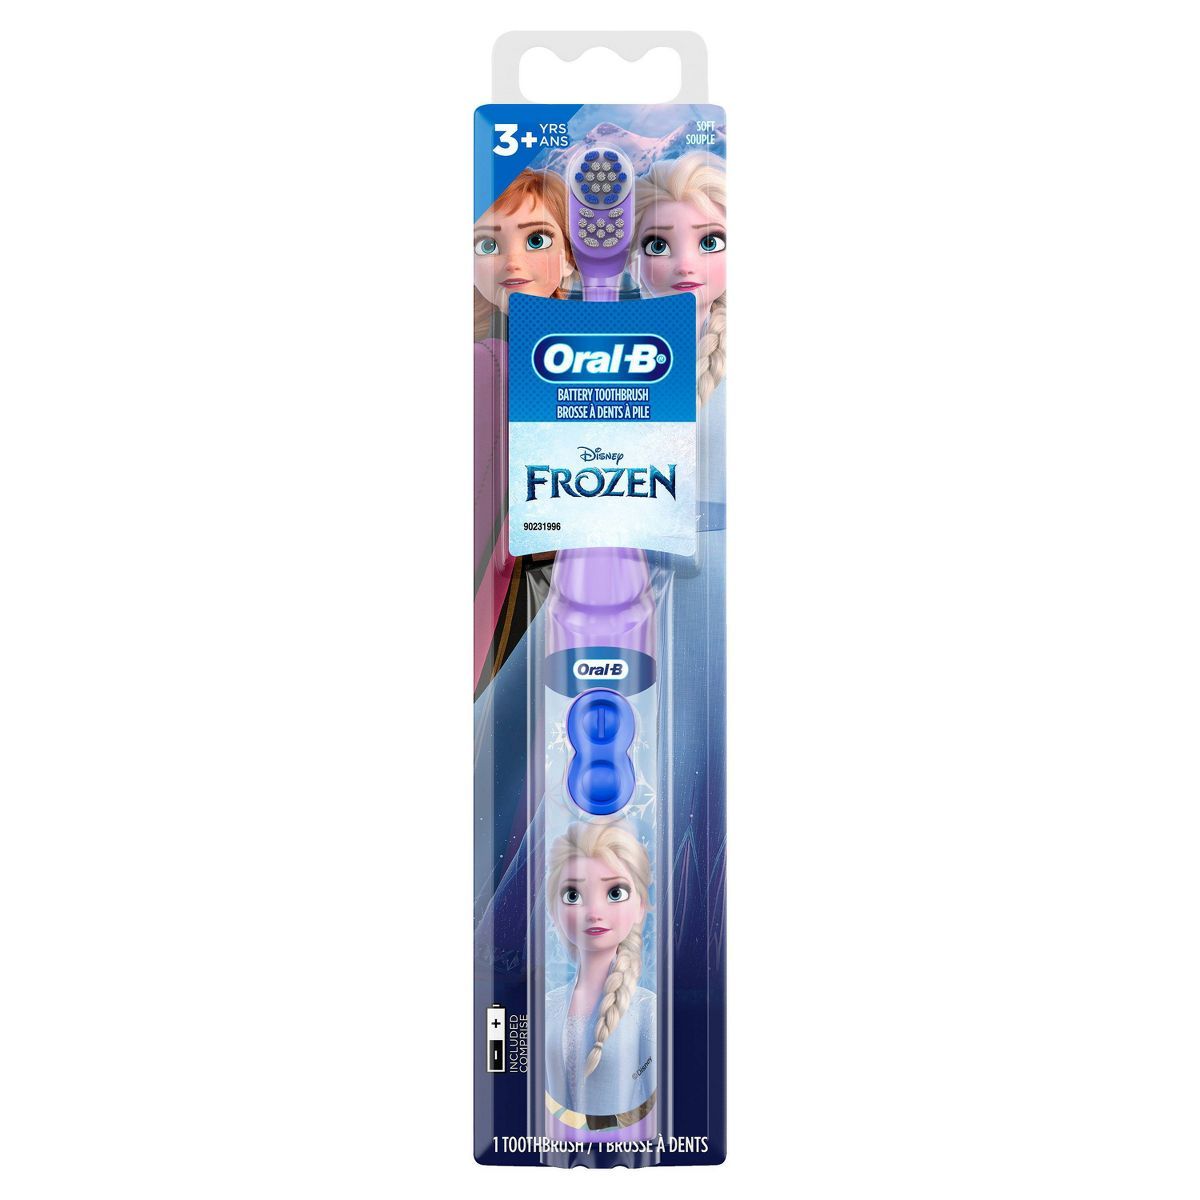 Oral-B Kid's Battery Toothbrush featuring Disney's Frozen, Soft Bristles, for Kids 3+ | Target